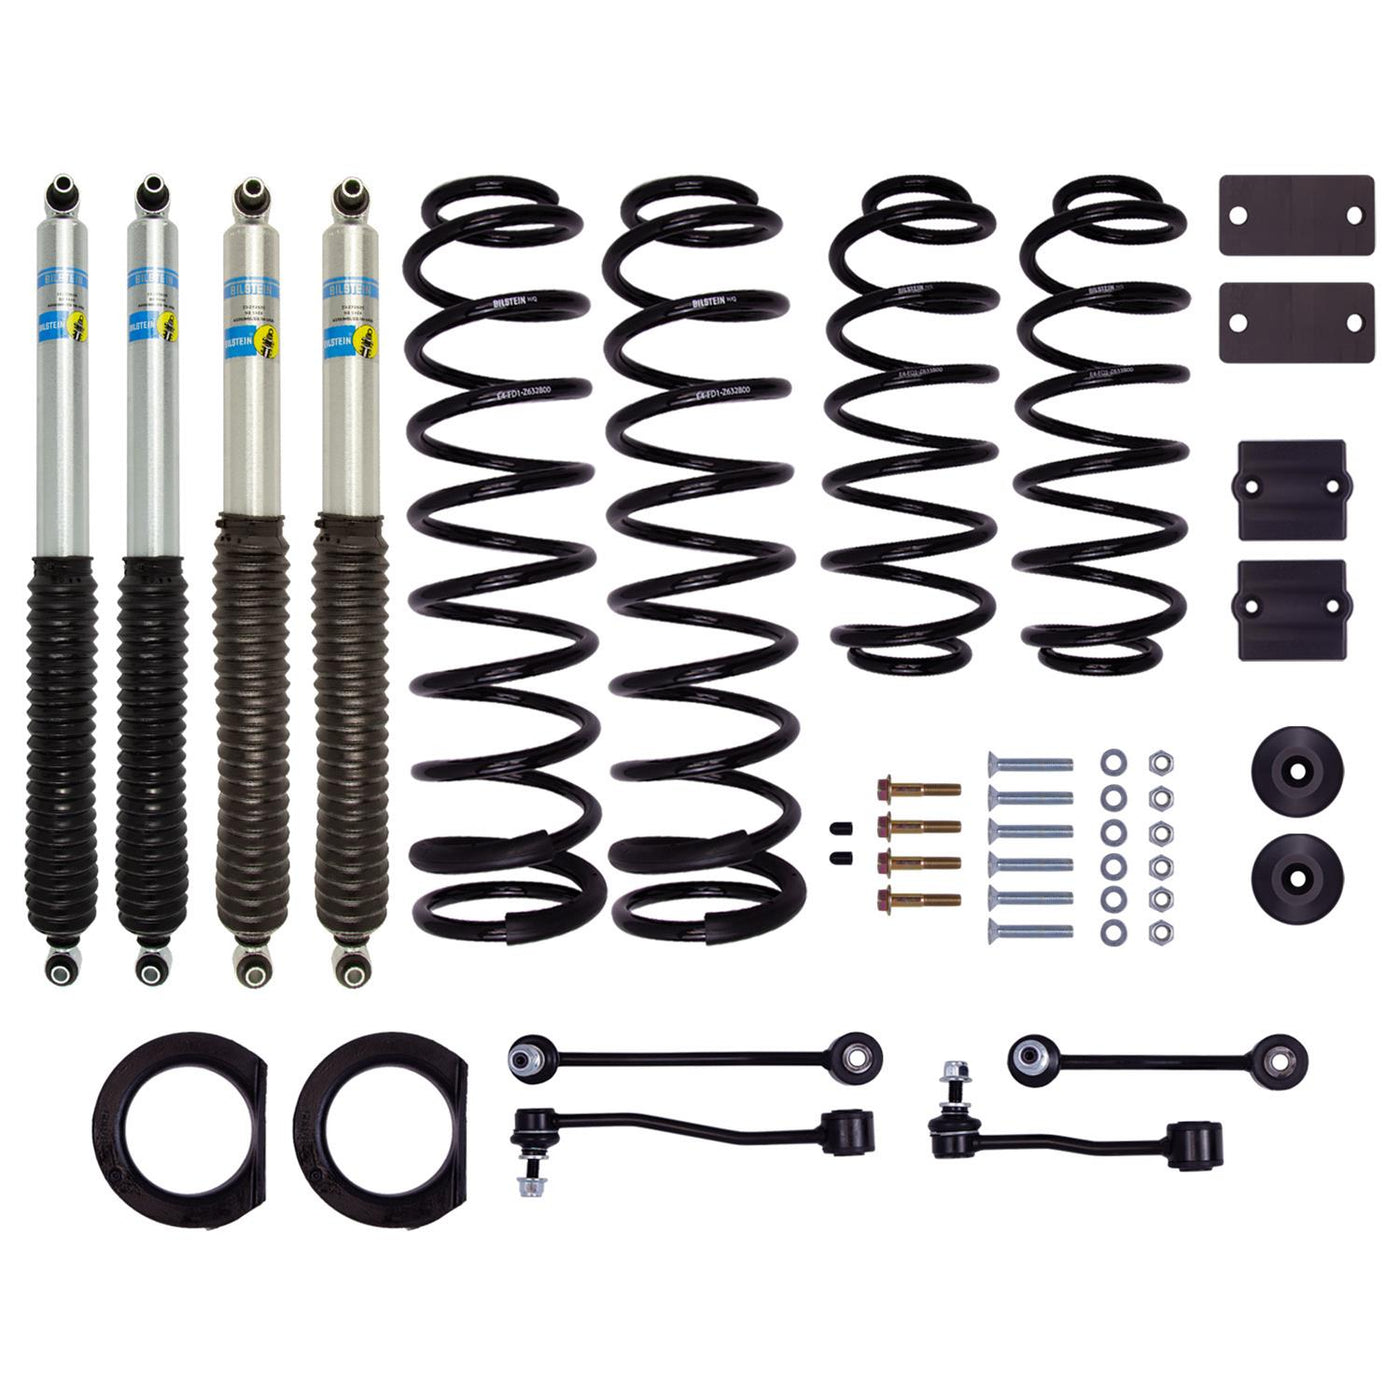 BILSTEIN 1.5IN B8 5100 LIFT KIT (WITHOUT WINCH) FOR JL 4 Door 2.0L & 3.6L